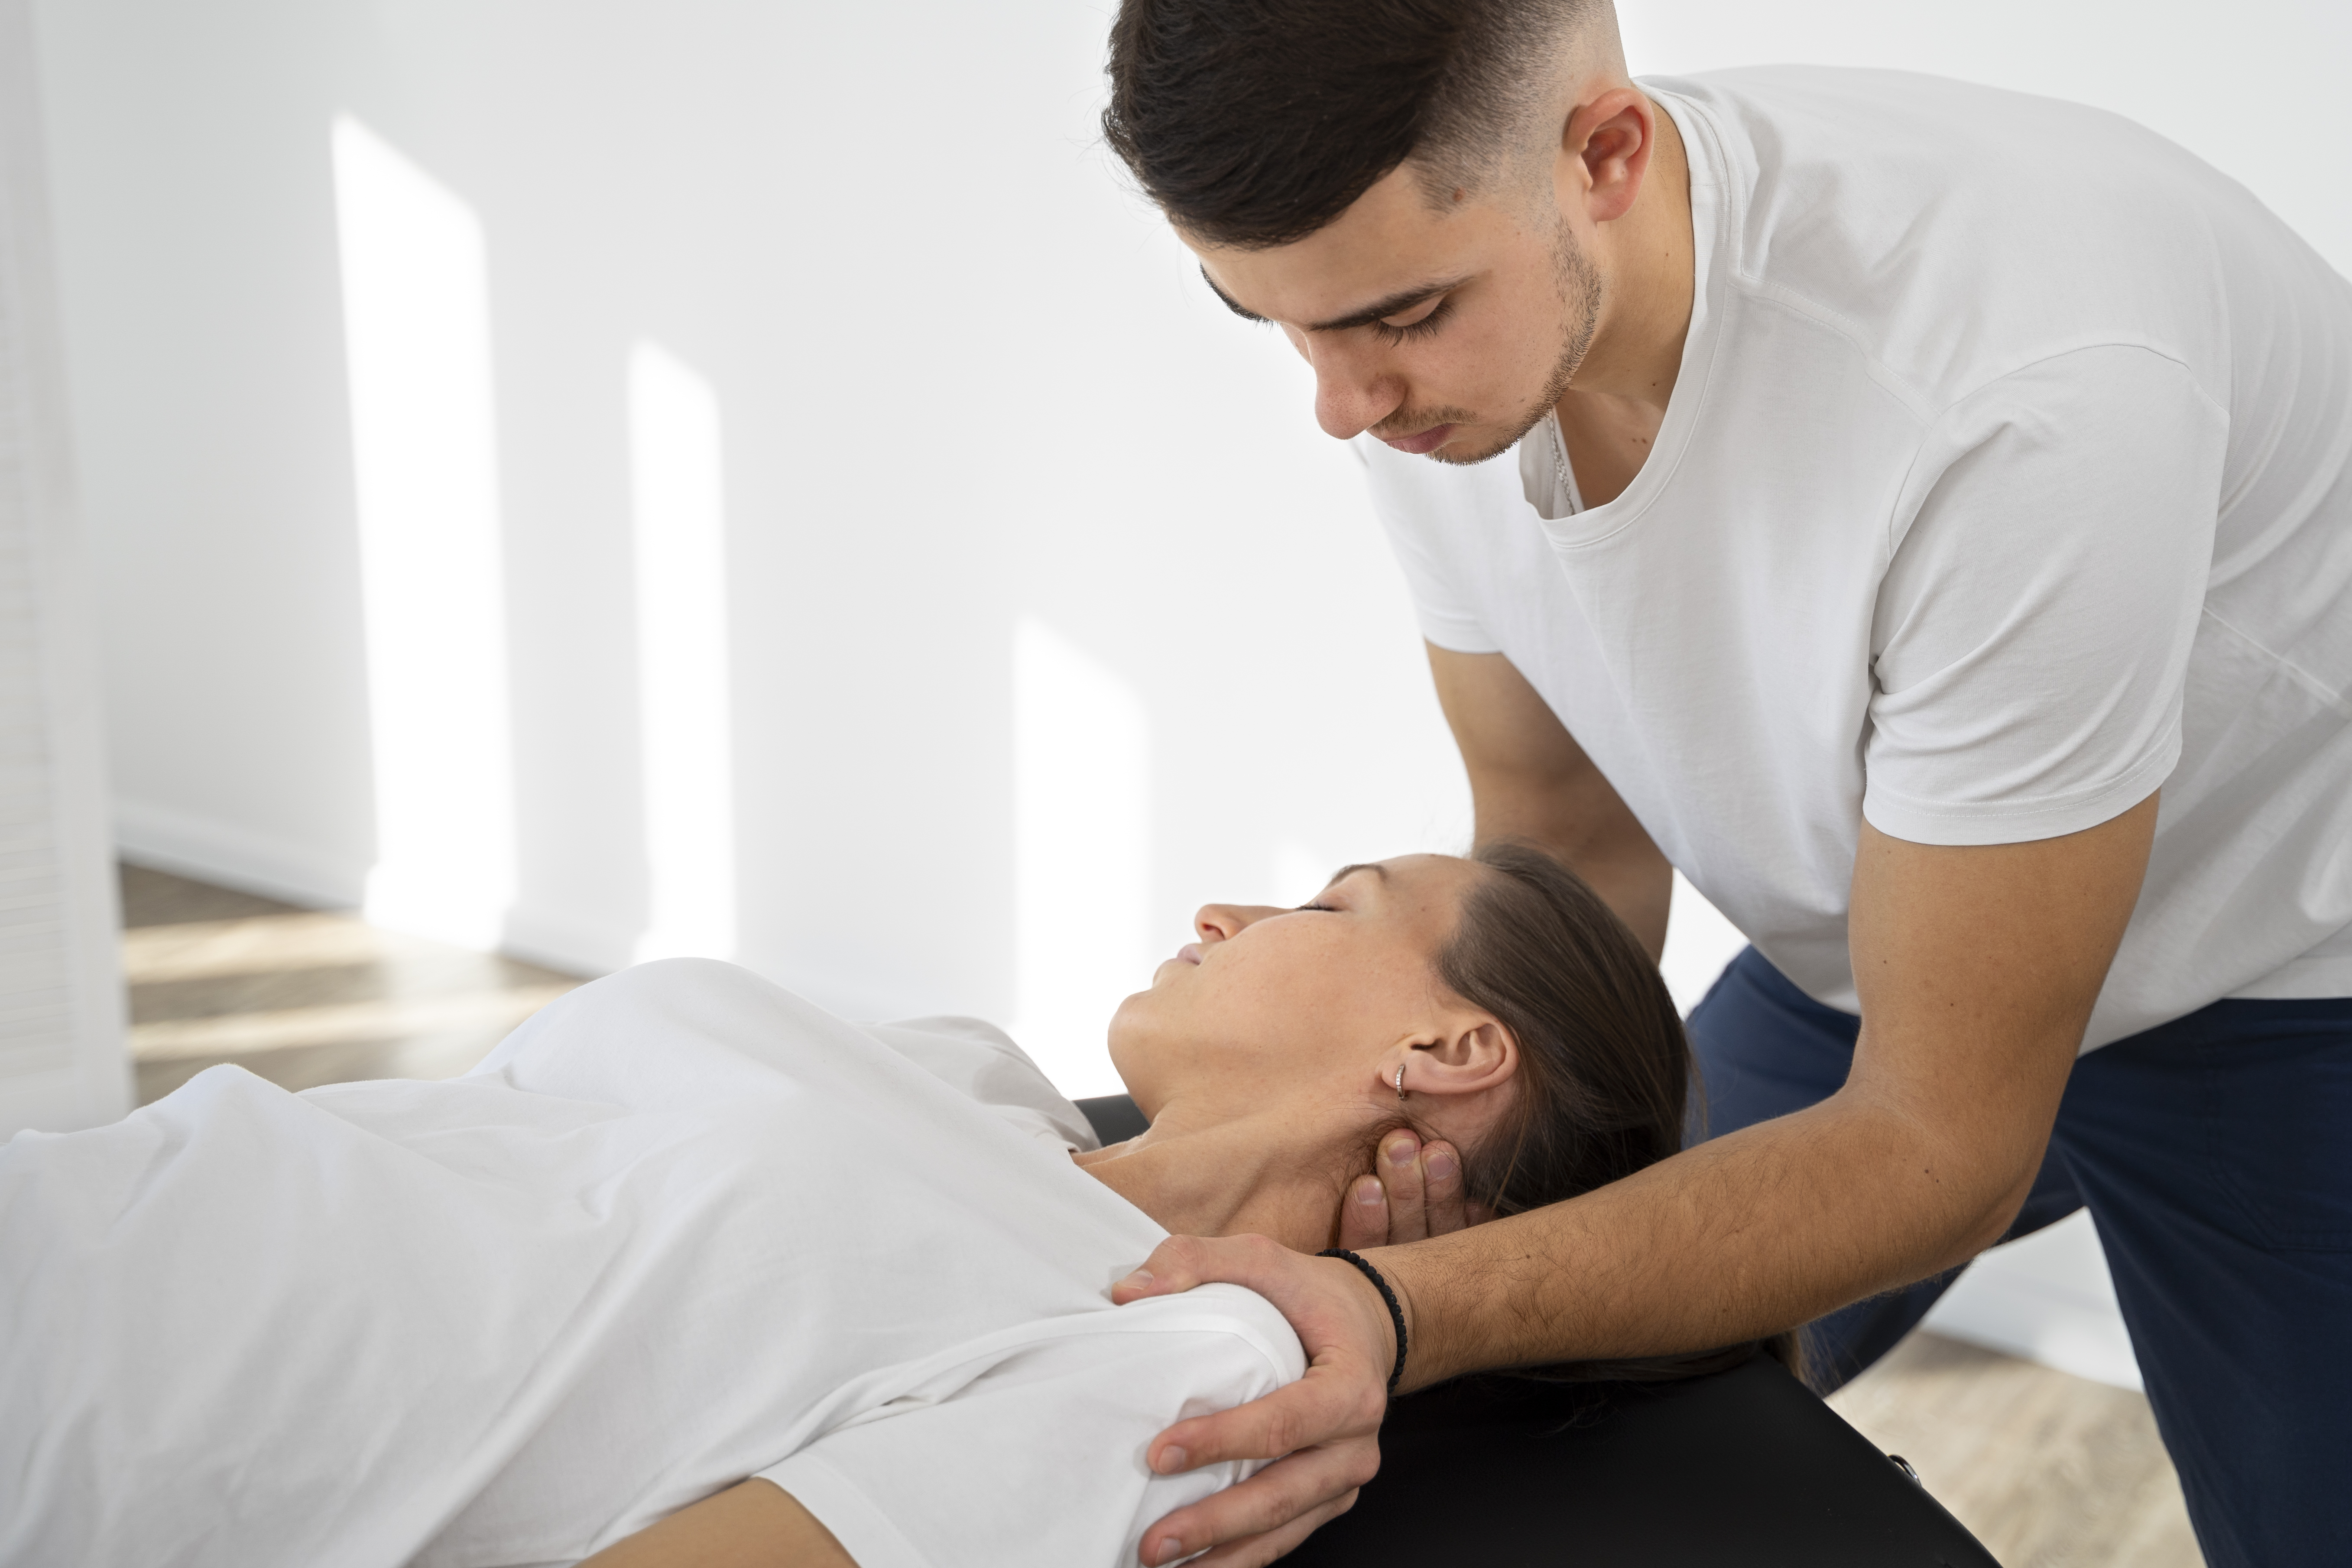 Why Now Is a Great Time to Be a Chiropractor